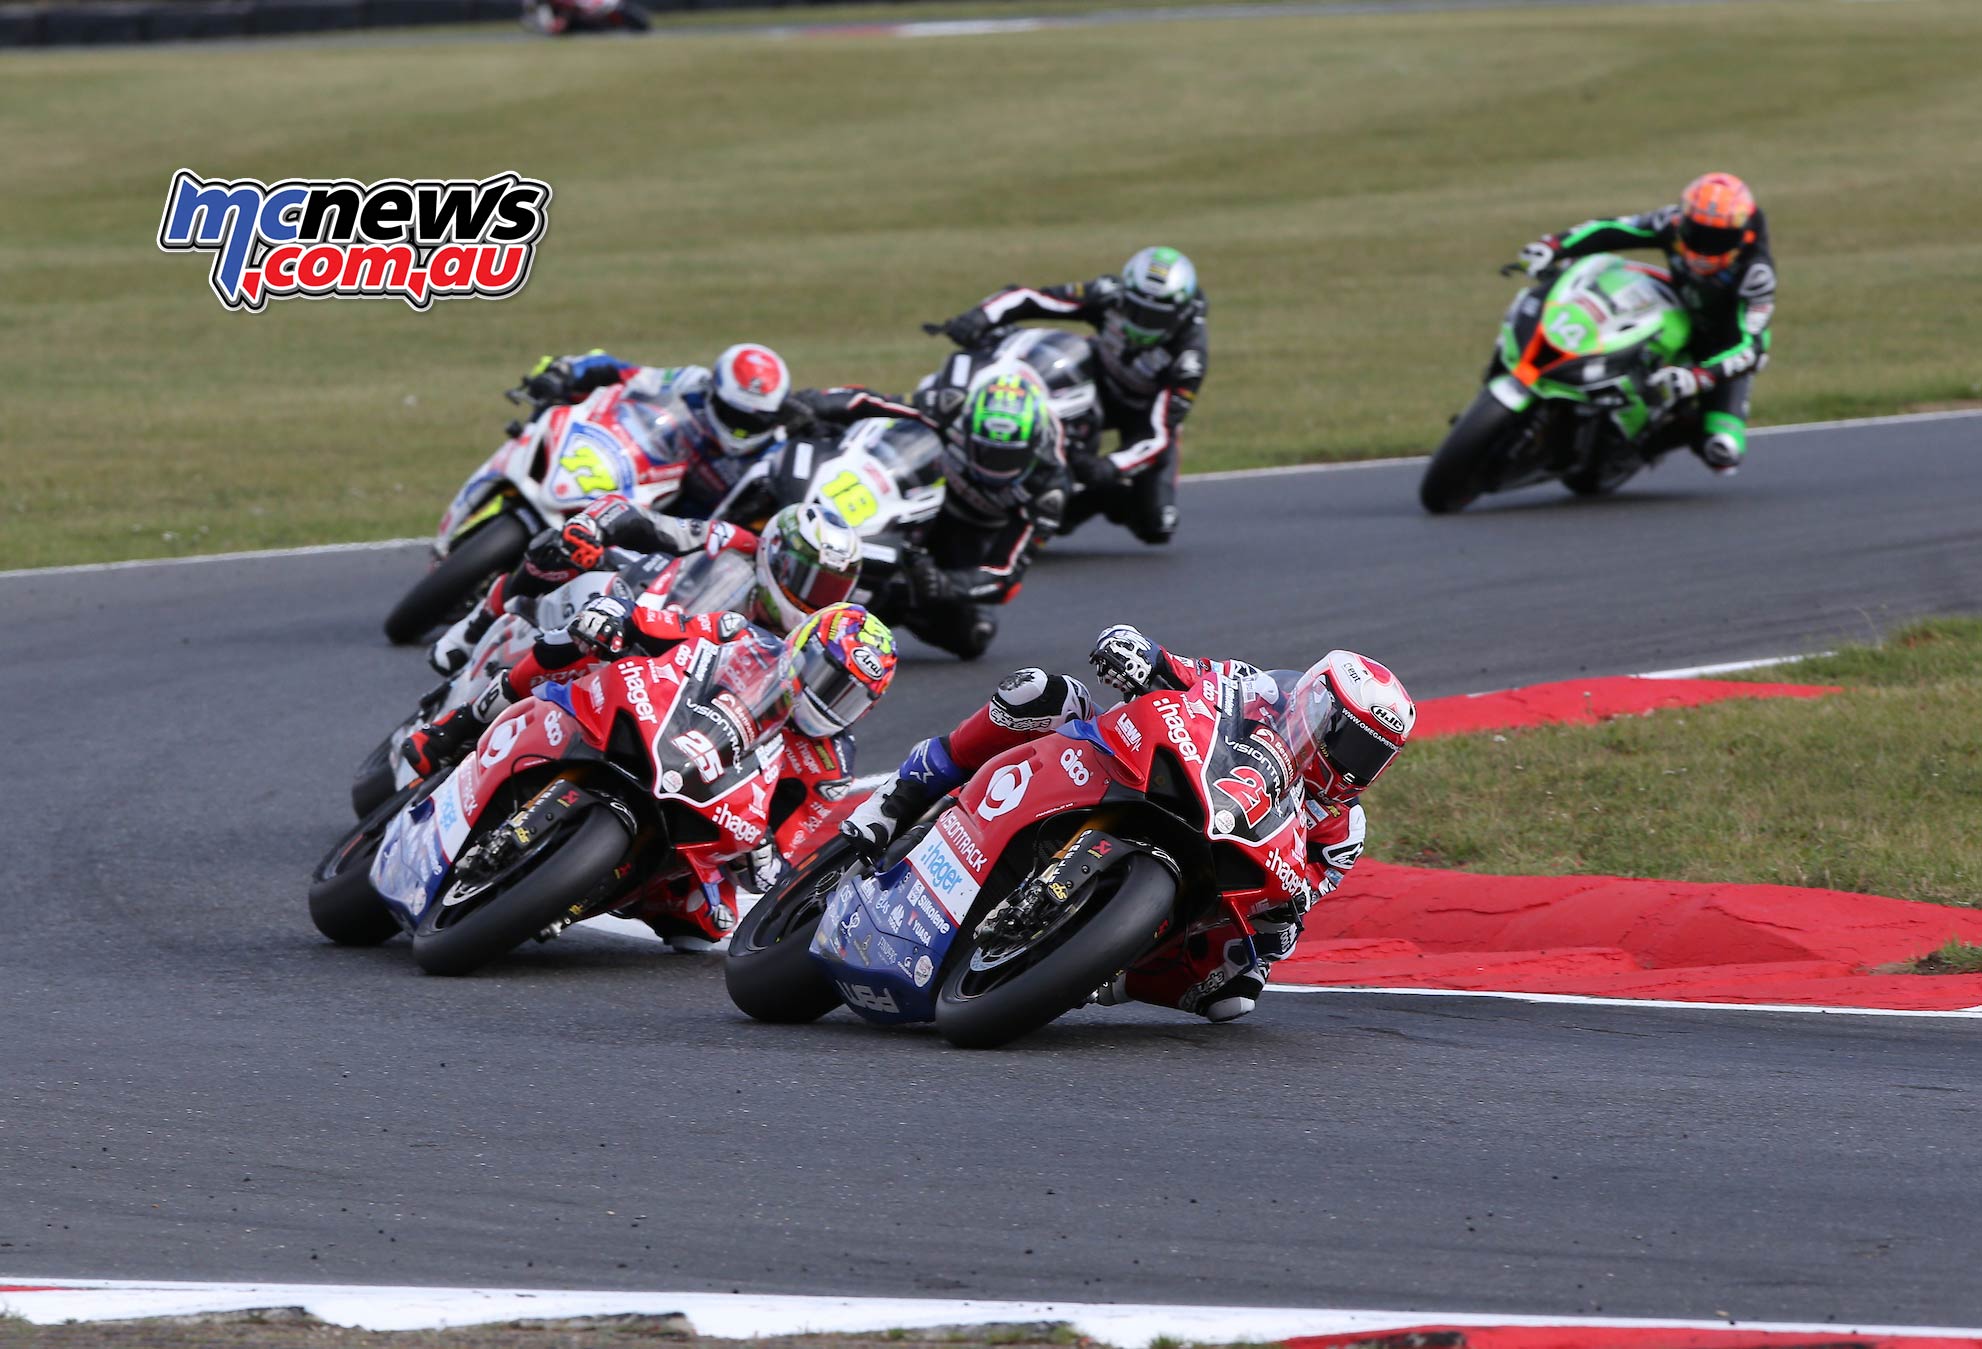 Bsb Images From Snetterton Mcnews